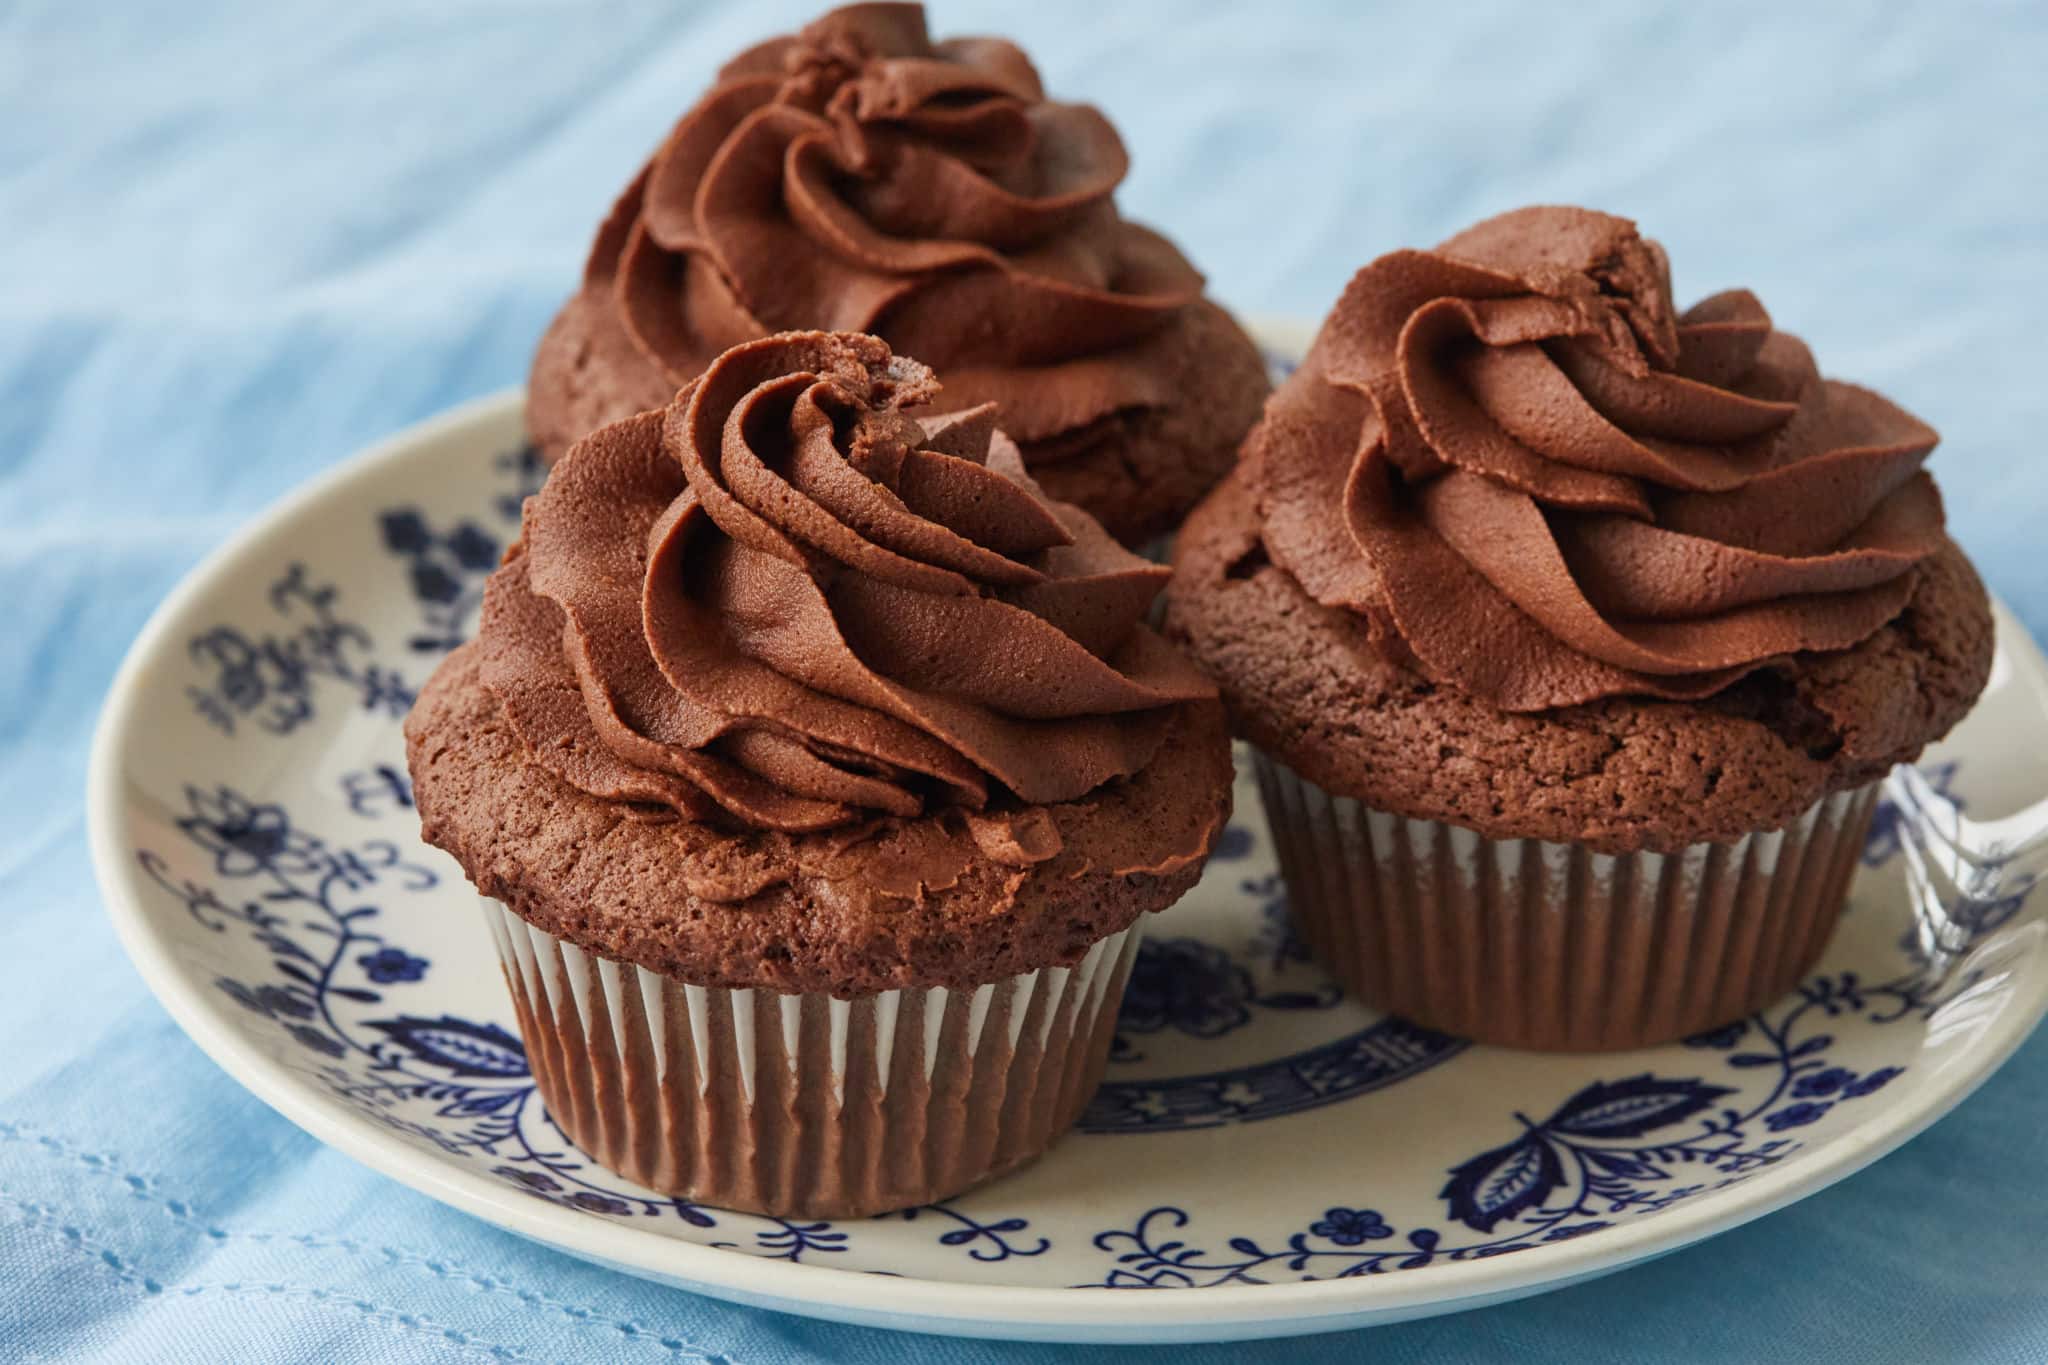 Nutella Buttercream Frosting on top of cupcakes.